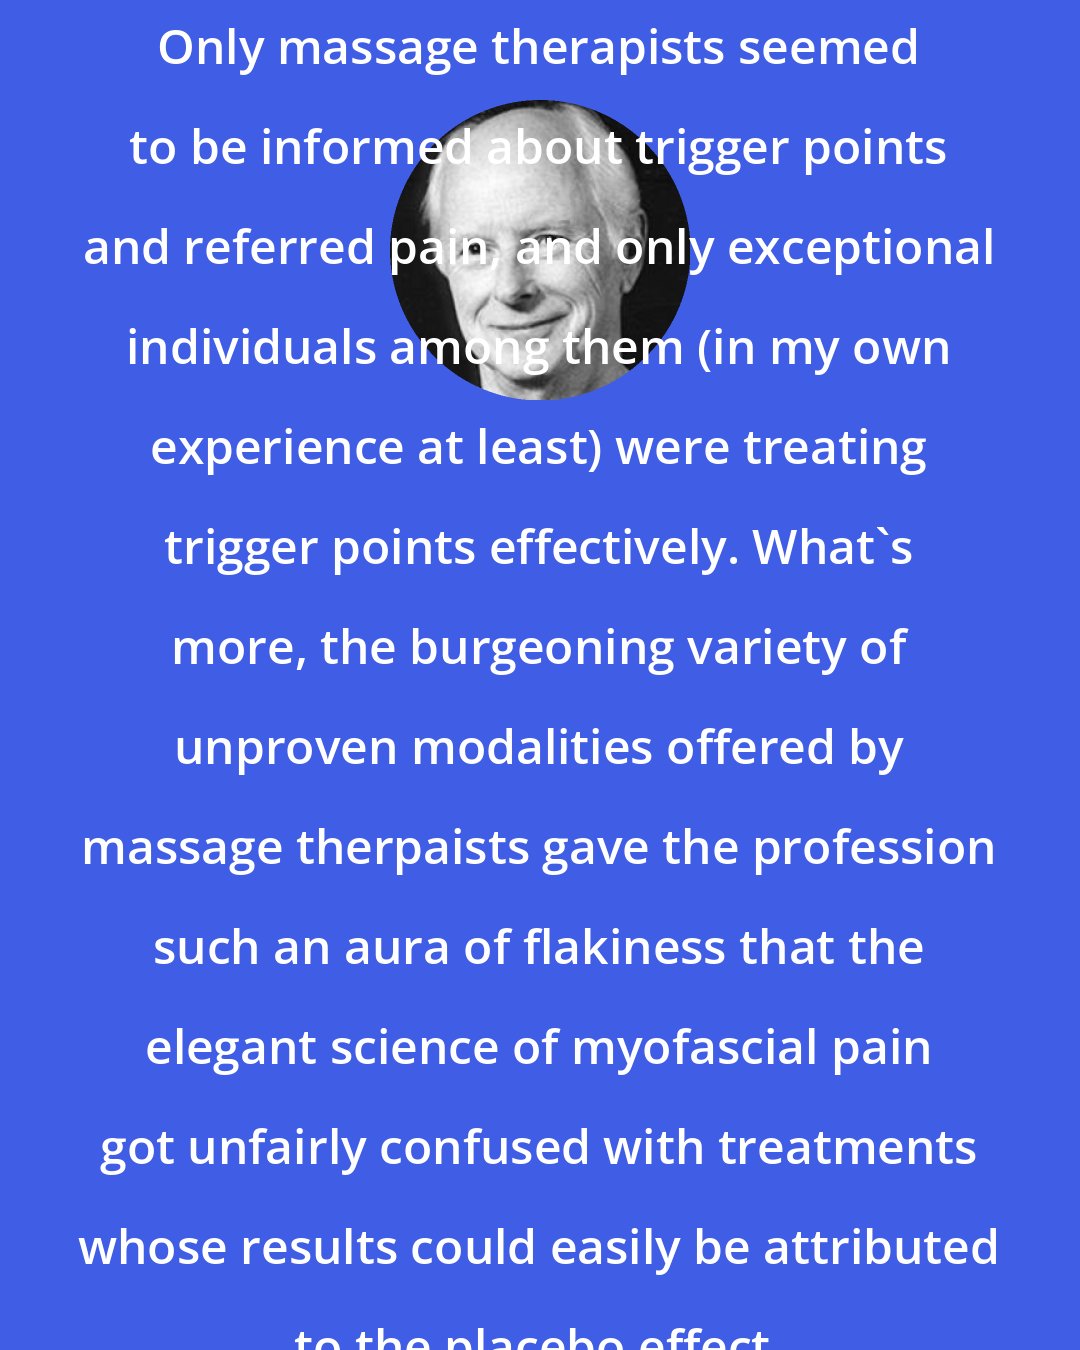 Clair Davies: Only massage therapists seemed to be informed about trigger points and referred pain, and only exceptional individuals among them (in my own experience at least) were treating trigger points effectively. What's more, the burgeoning variety of unproven modalities offered by massage therpaists gave the profession such an aura of flakiness that the elegant science of myofascial pain got unfairly confused with treatments whose results could easily be attributed to the placebo effect.